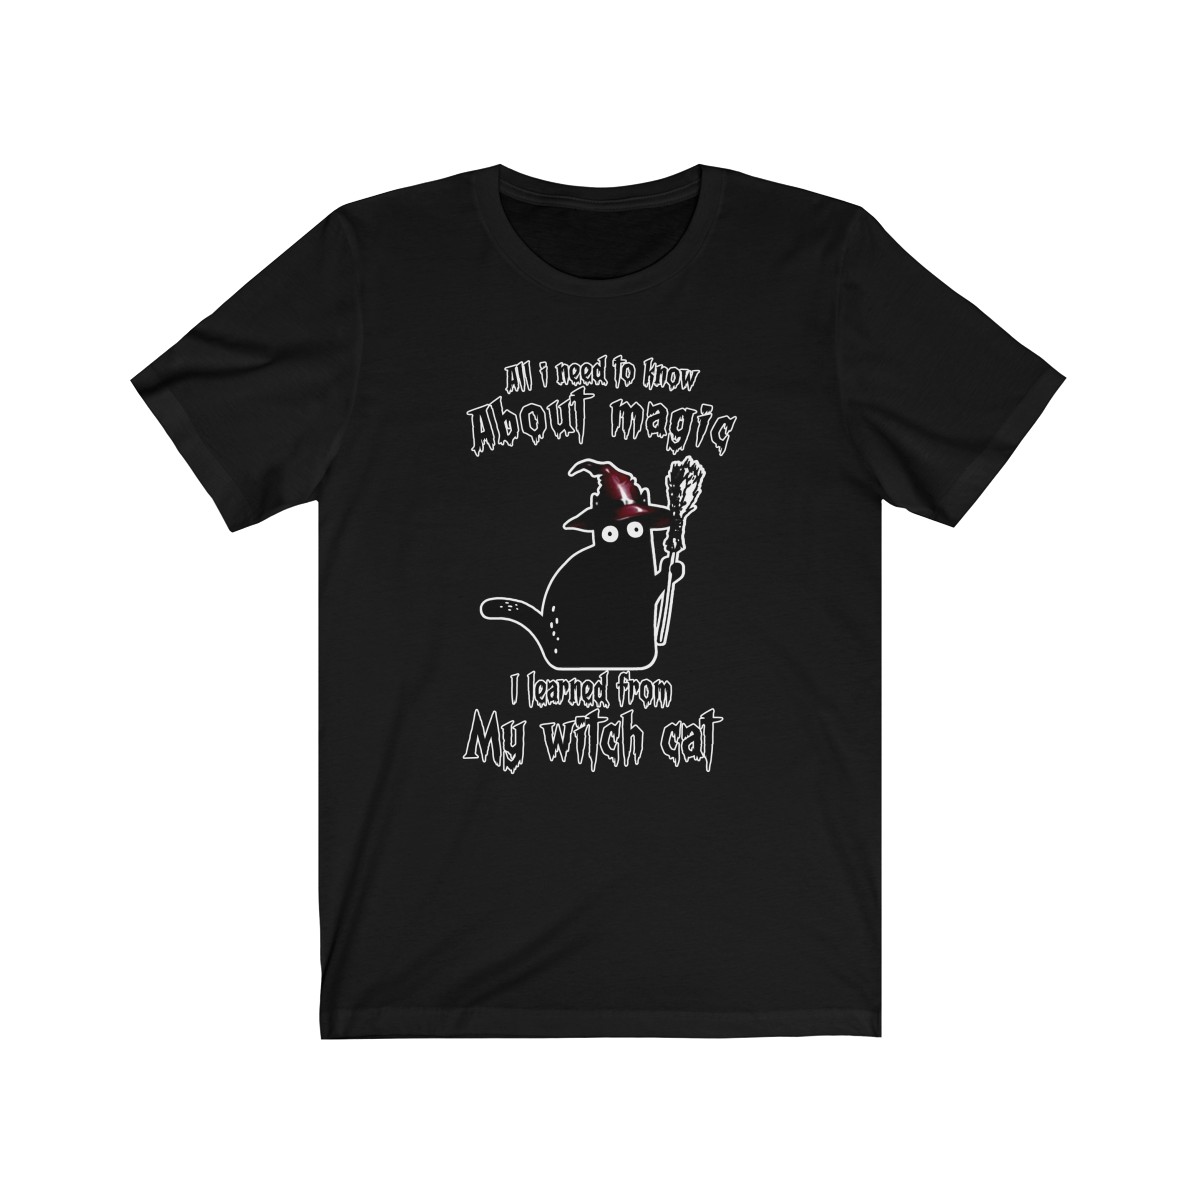 All I Need To Know About Magic, Black Cat Unisex T-Shirt, Sweatshirt, Hoodie